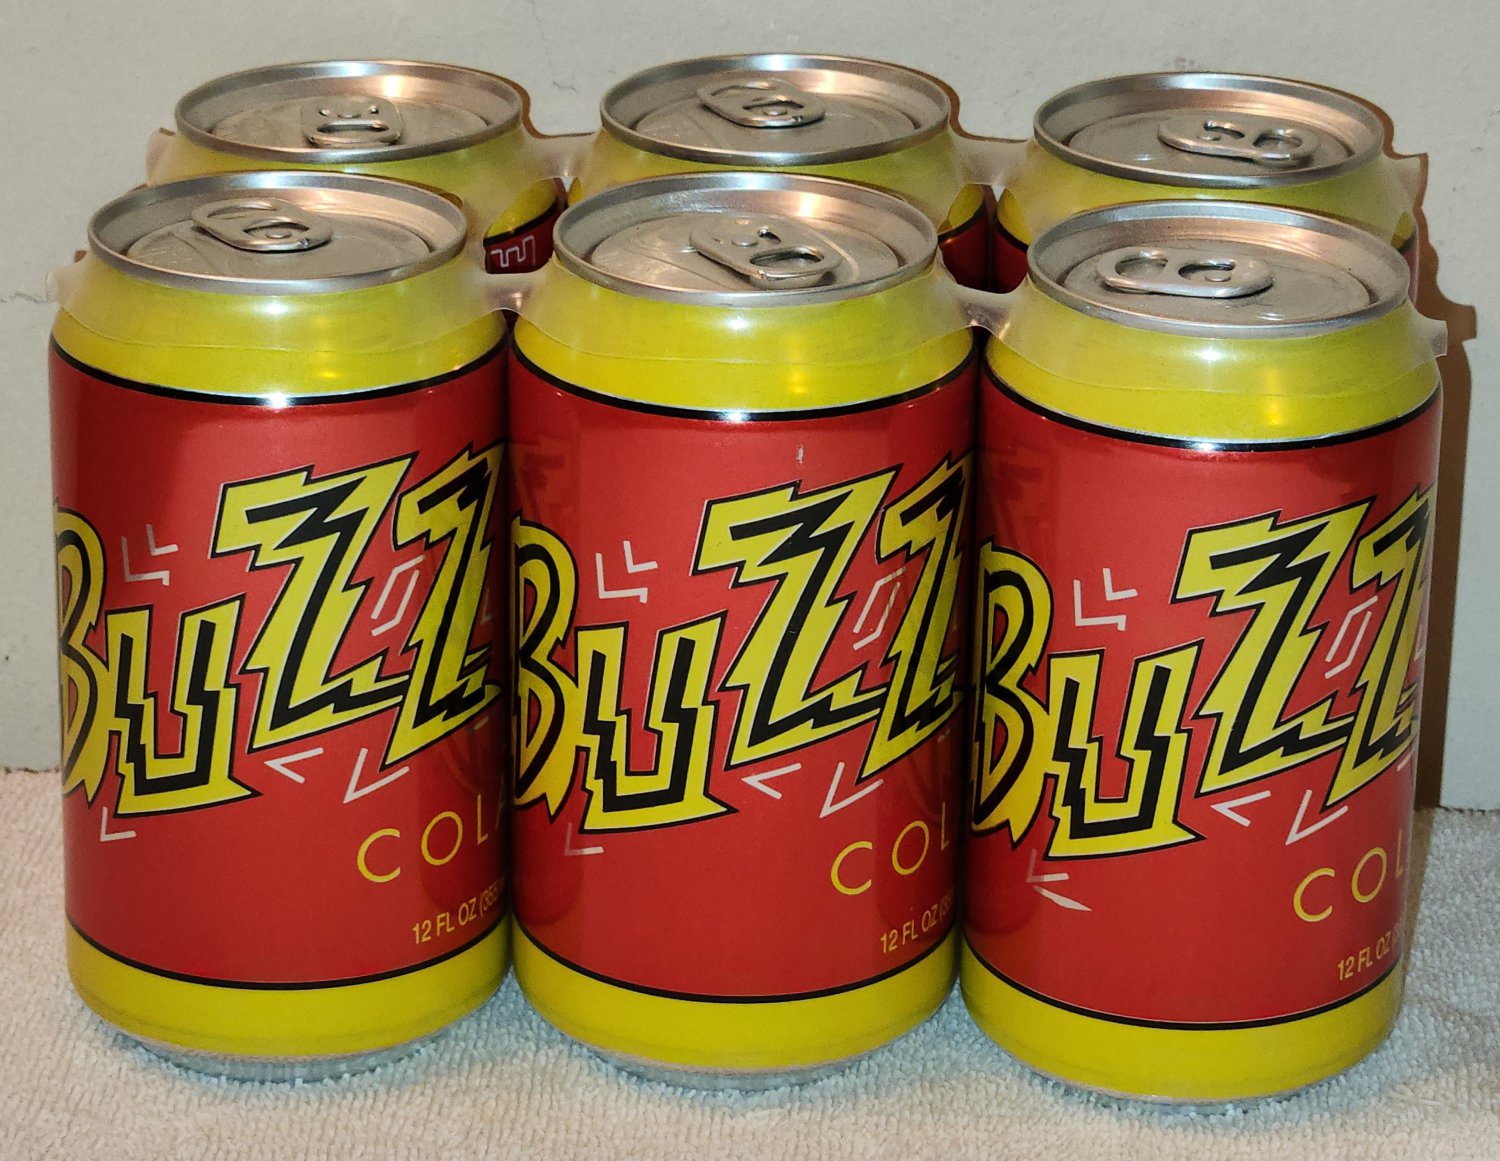 BUZZ Cola Soda Six 6 Pack 12 Ounce Cans In Plastic Ring Holder The Simpsons Movie 2007